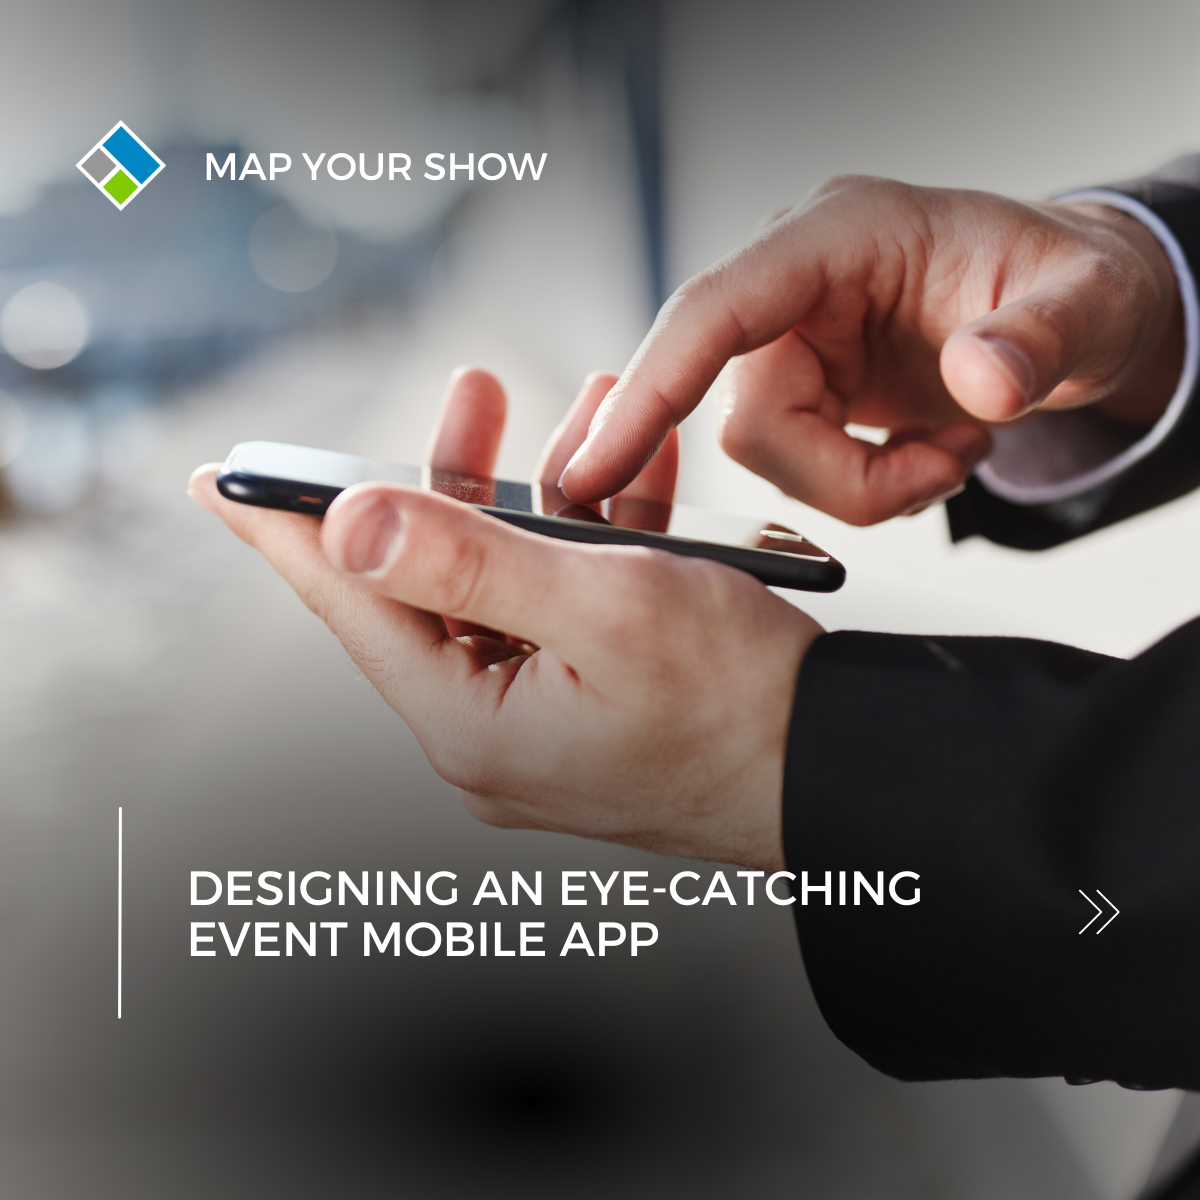 Designing an Eye-Catching Event Mobile App. Map Your Show Event Management Technology and Trade Show Mobile App Provider